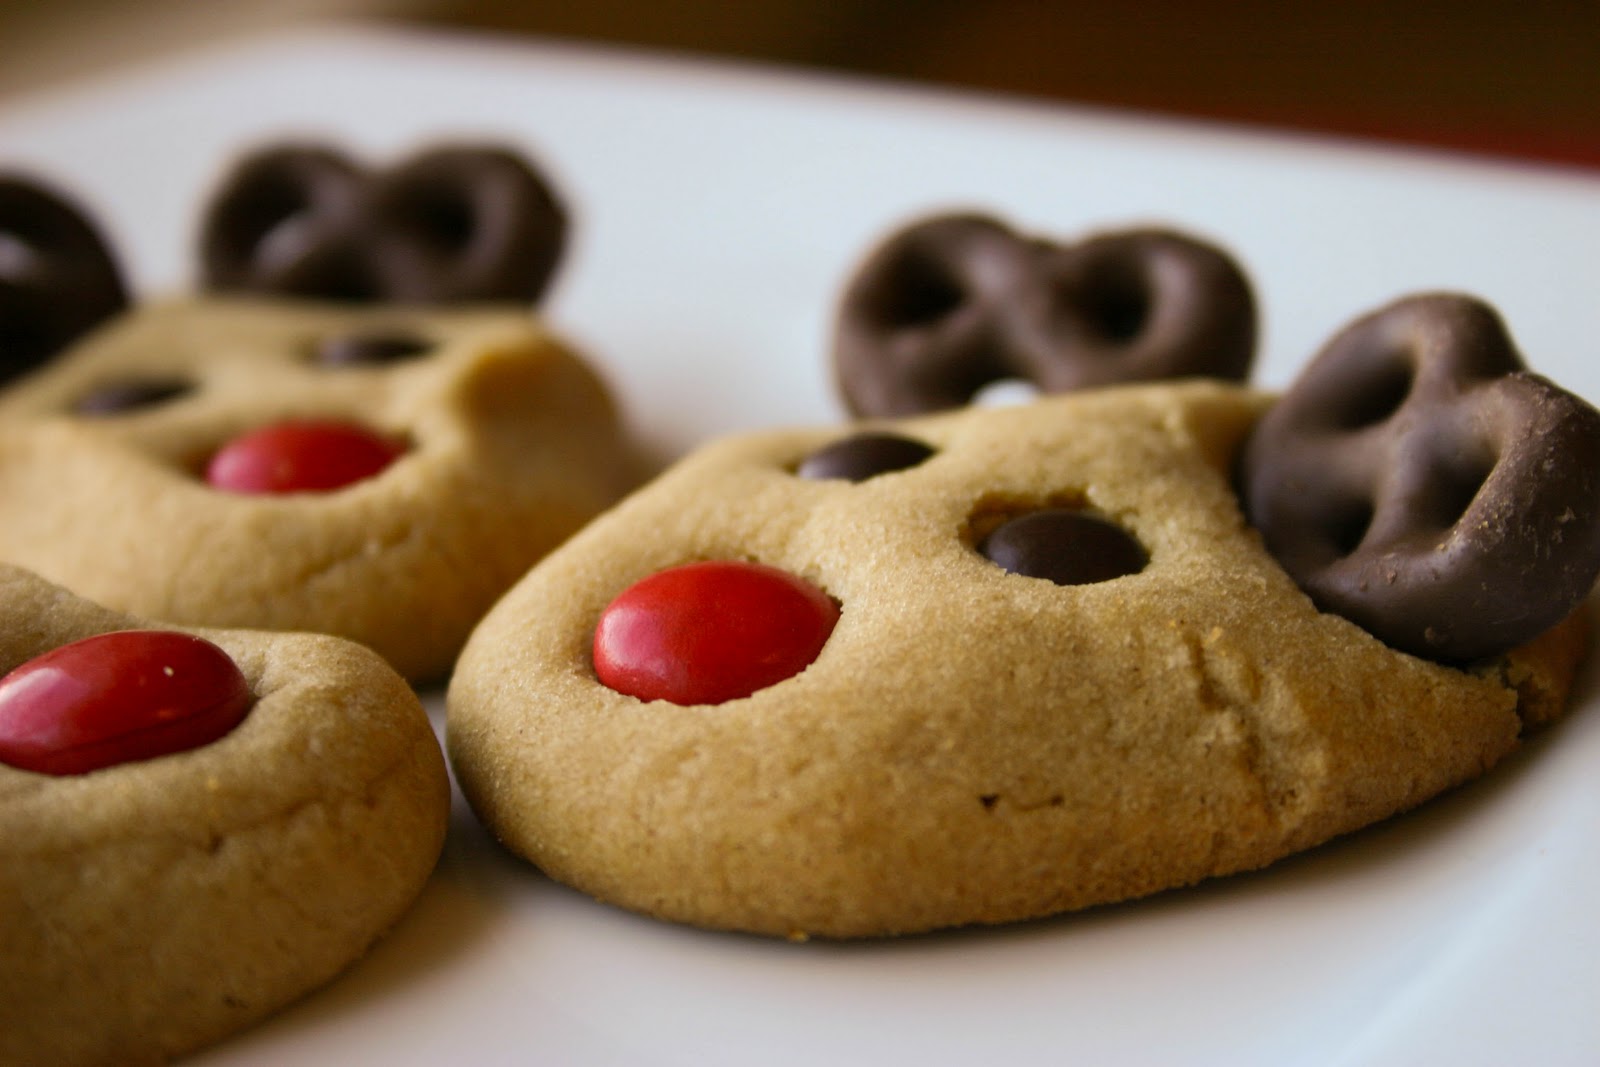 Butter Cookies. at with make butter Peanut chocolate how Reindeer Bakergirl: to  home